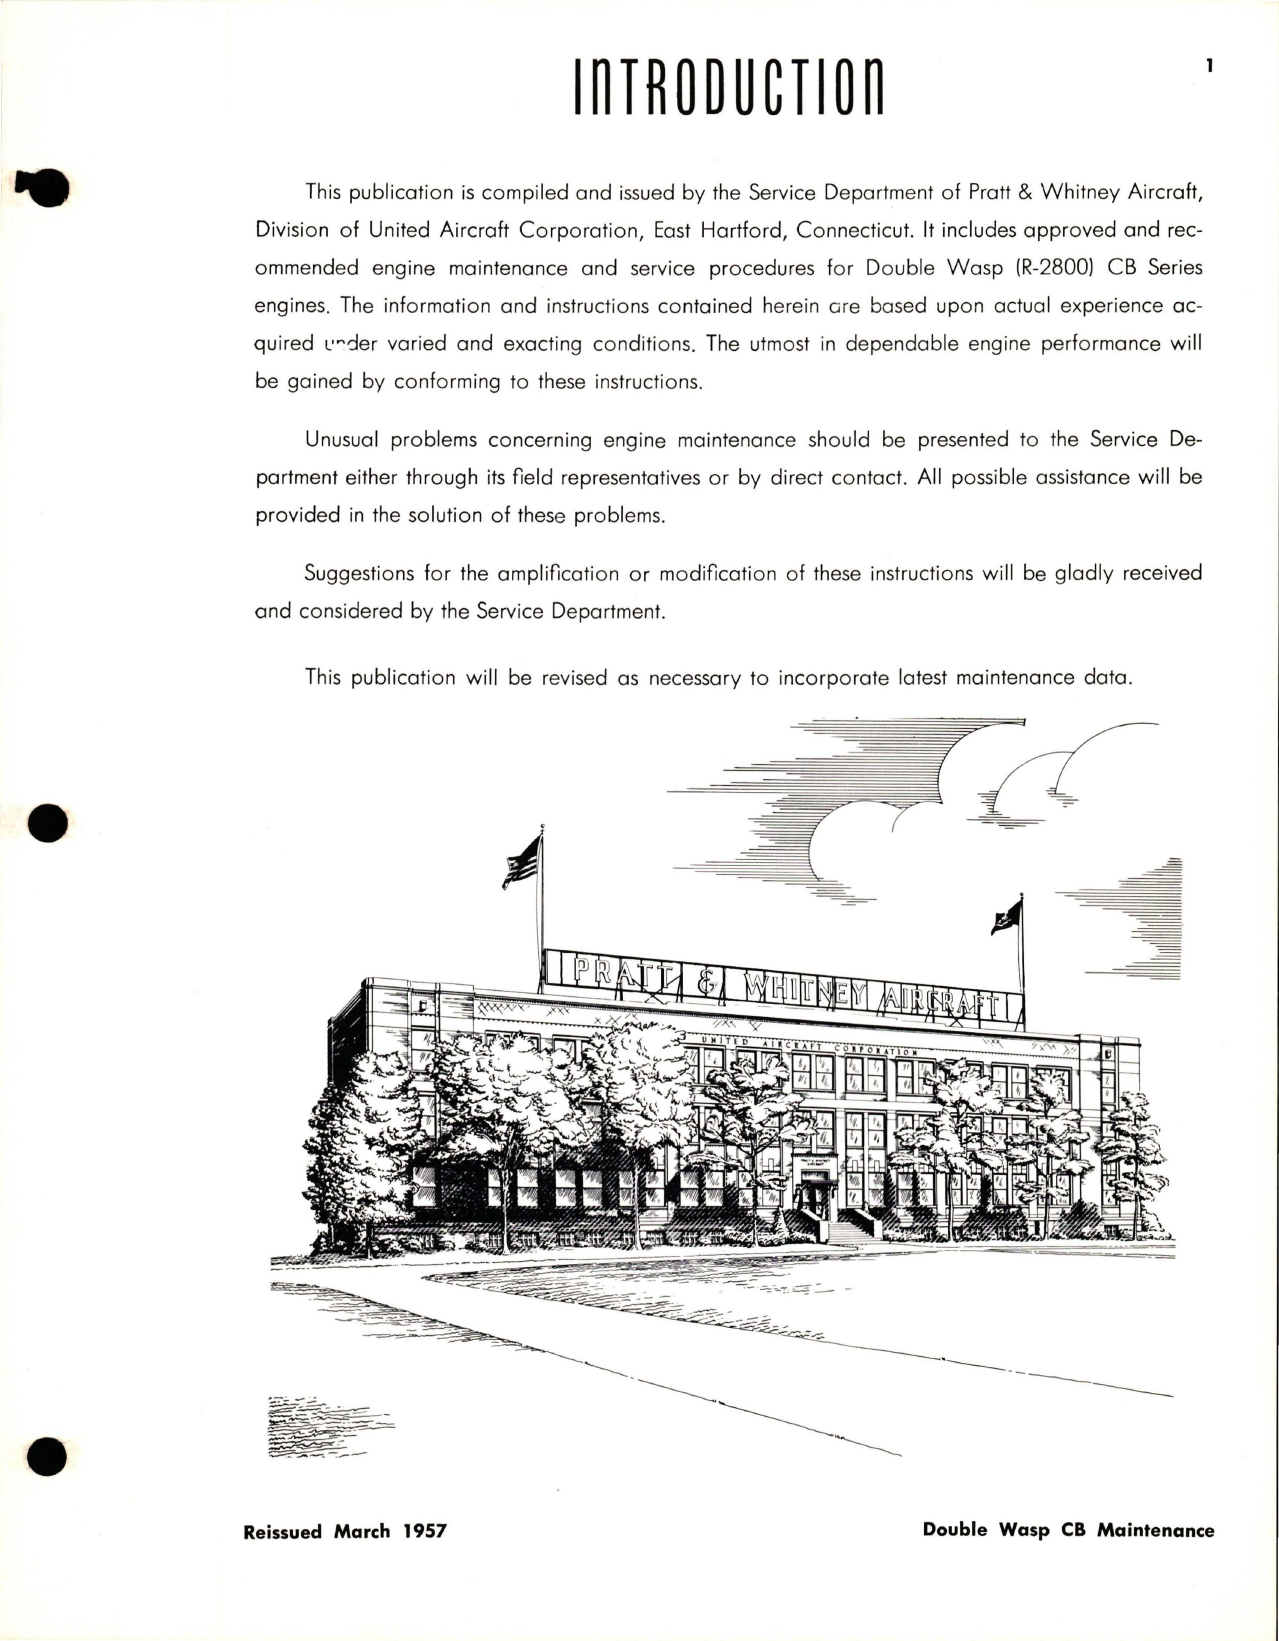 Sample page 5 from AirCorps Library document: Maintenance Manual for Double Wasp CB Series - Part 166498 